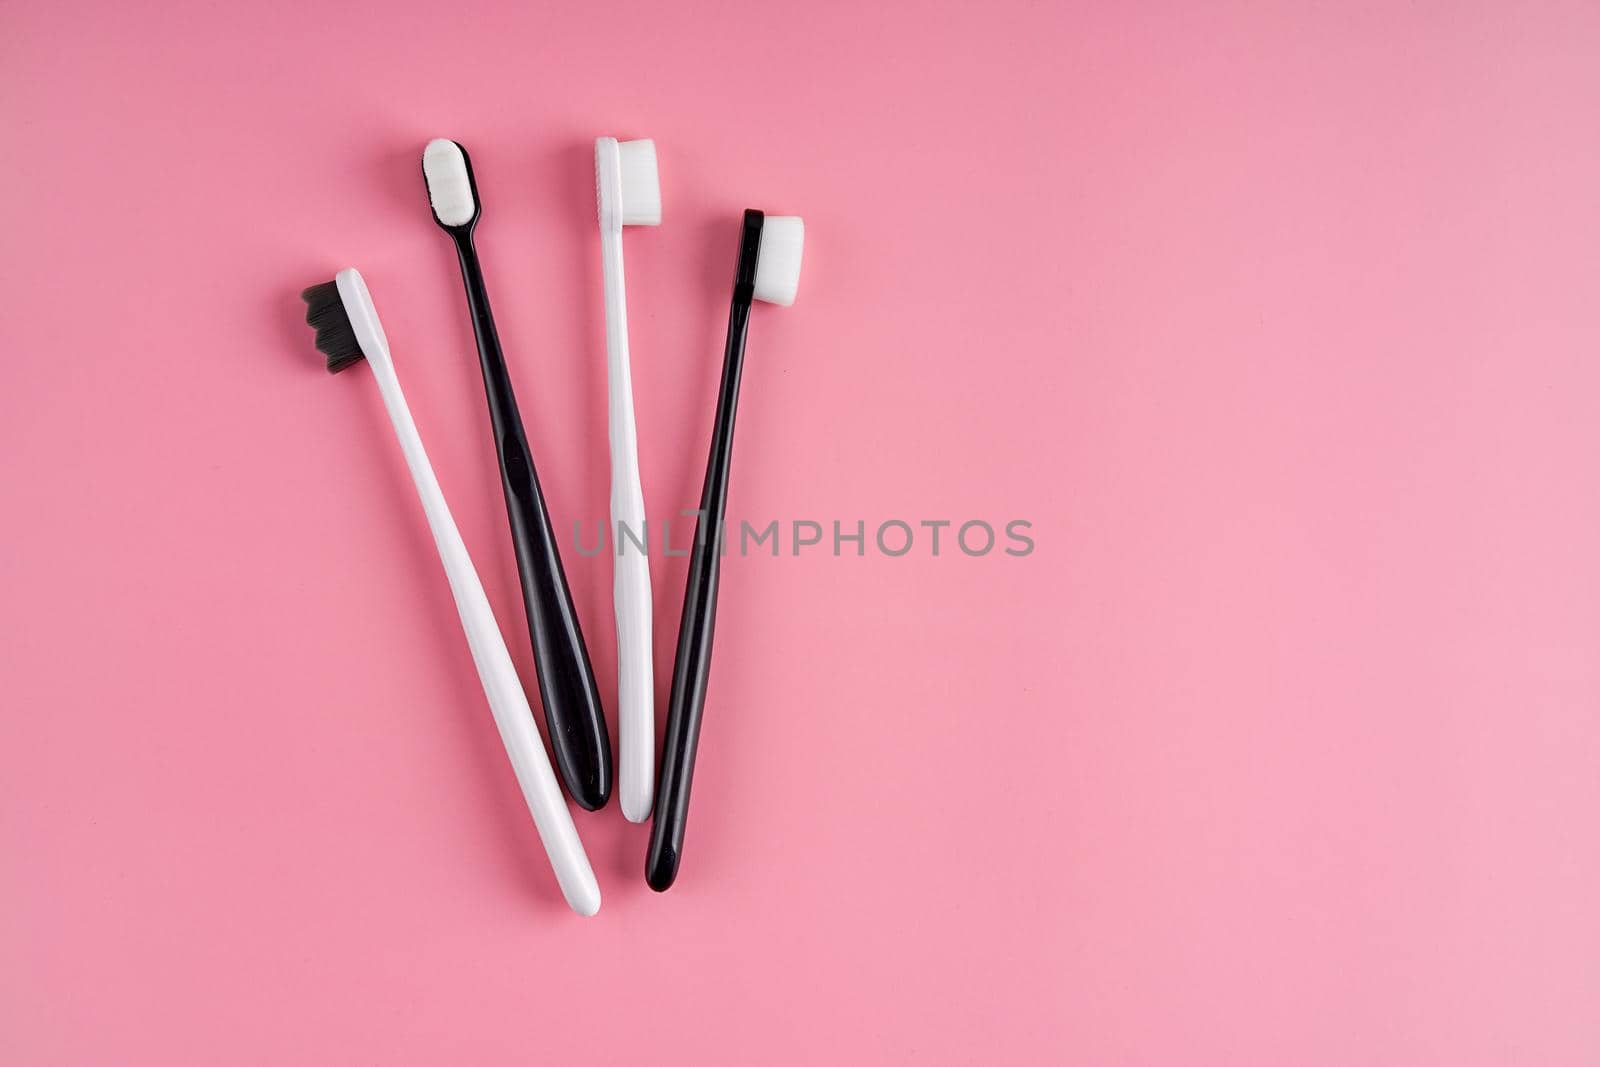 Fashionable toothbrush with soft bristles. Popular toothbrushes. Hygiene trends. Kit of toothbrushes on pink background by Try_my_best